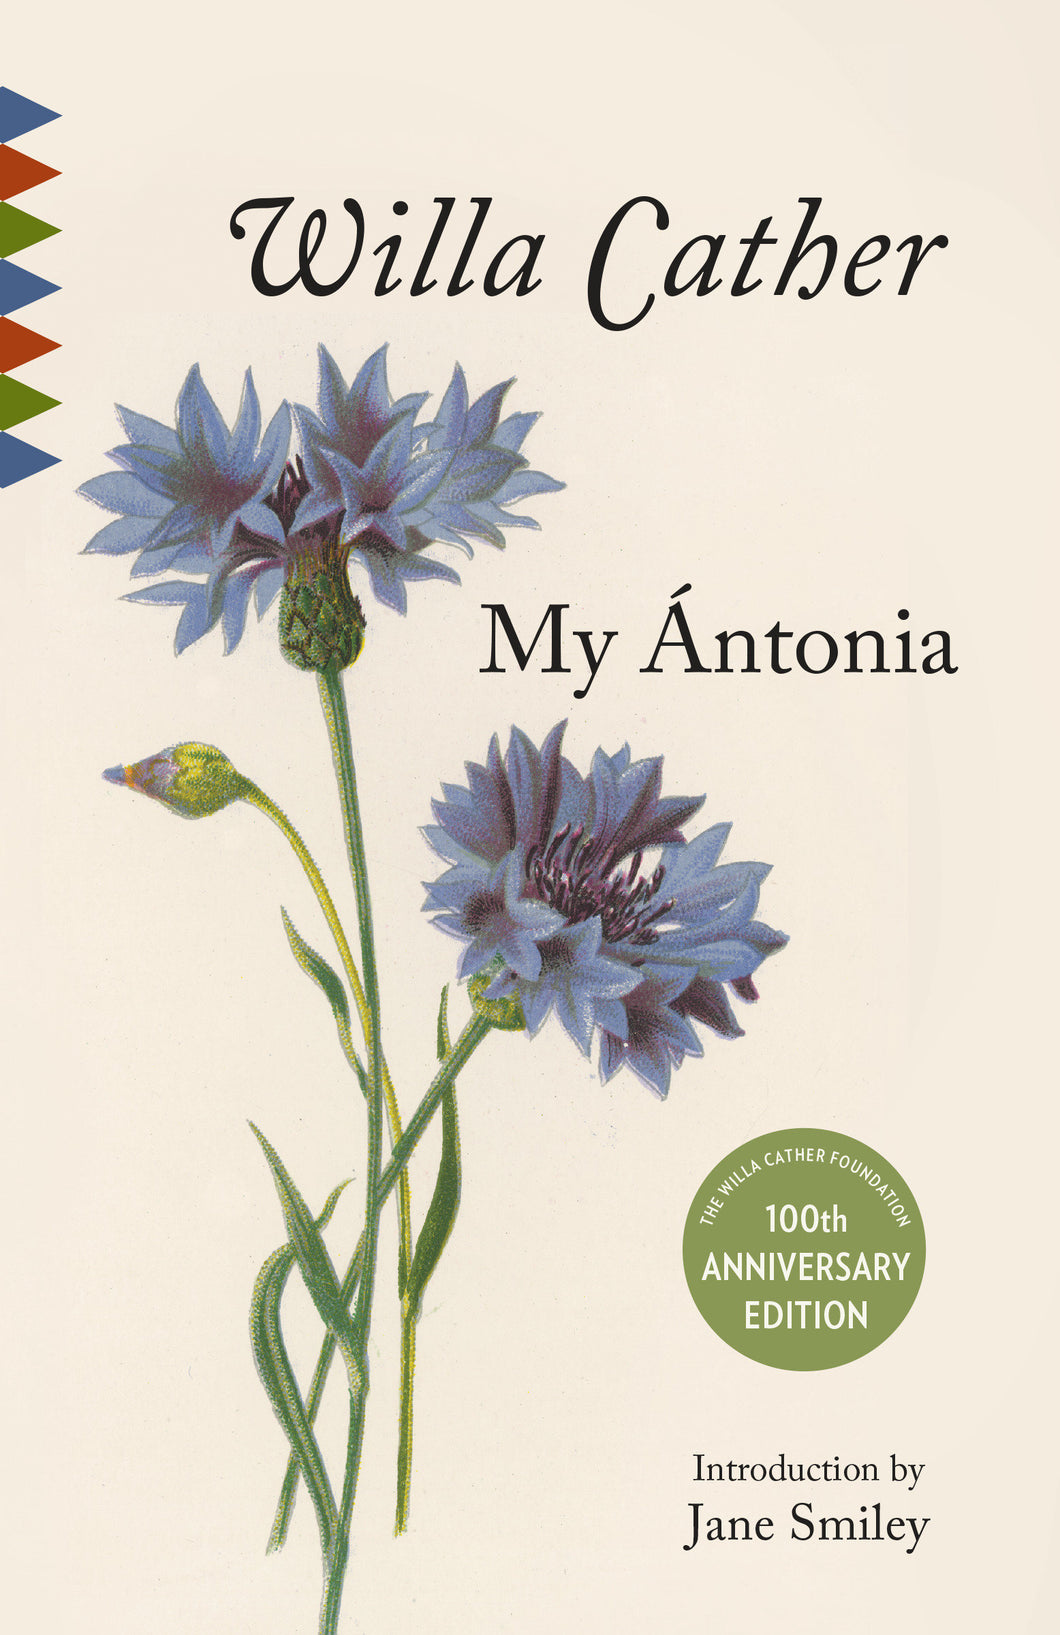 My Antonia: Introduction by Jane Smiley